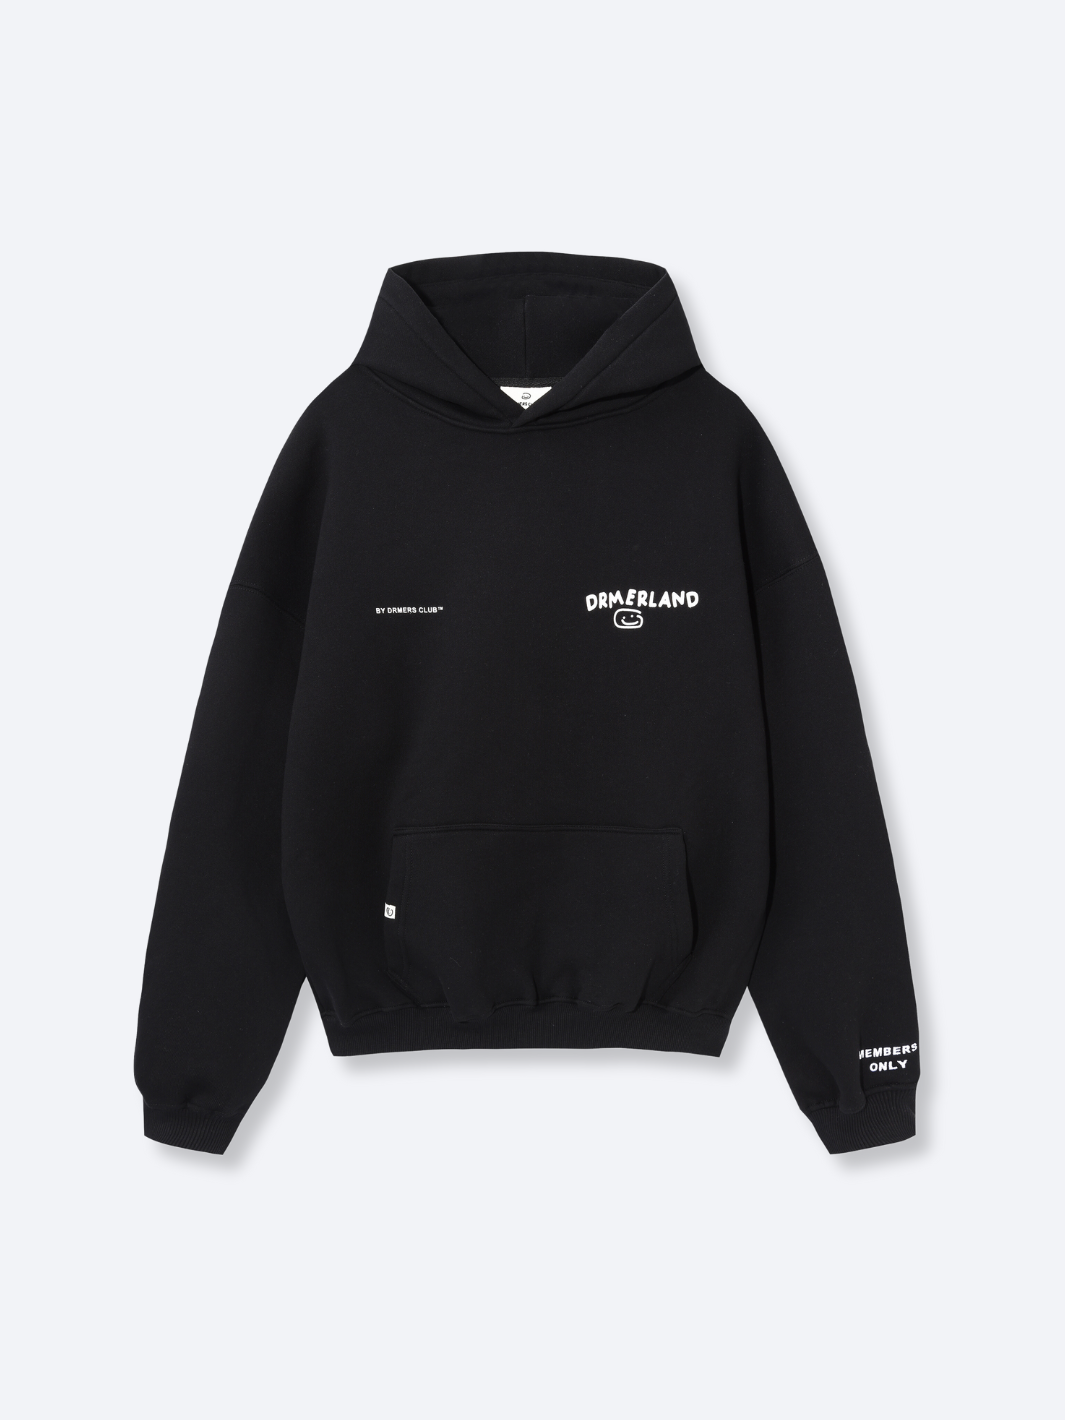 THANKS FOR BEING HERE HOODIE - BLACK